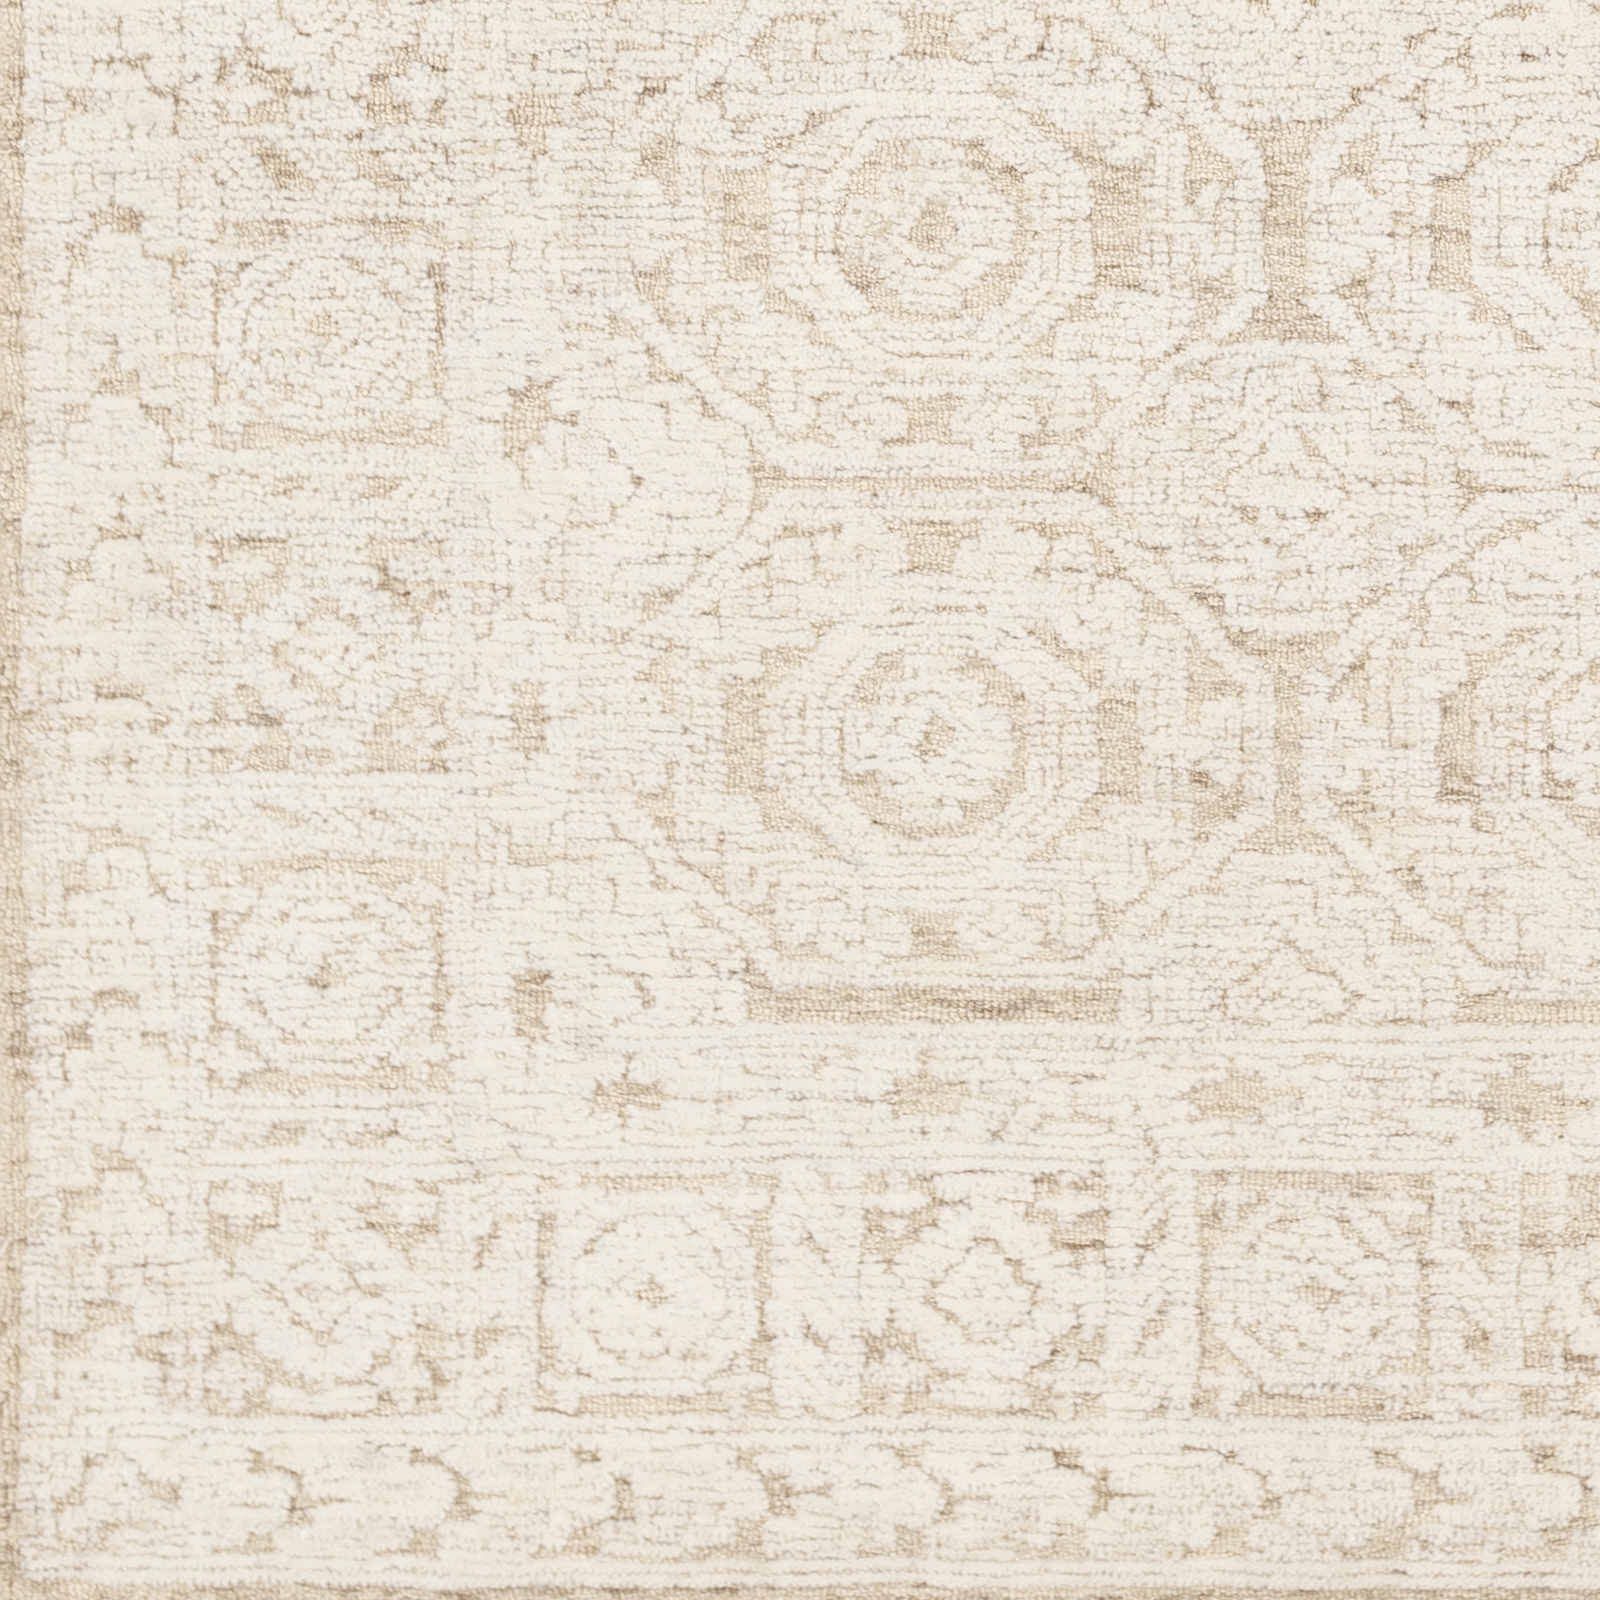 Louvre Rug, 5' x 7'6" - Image 2